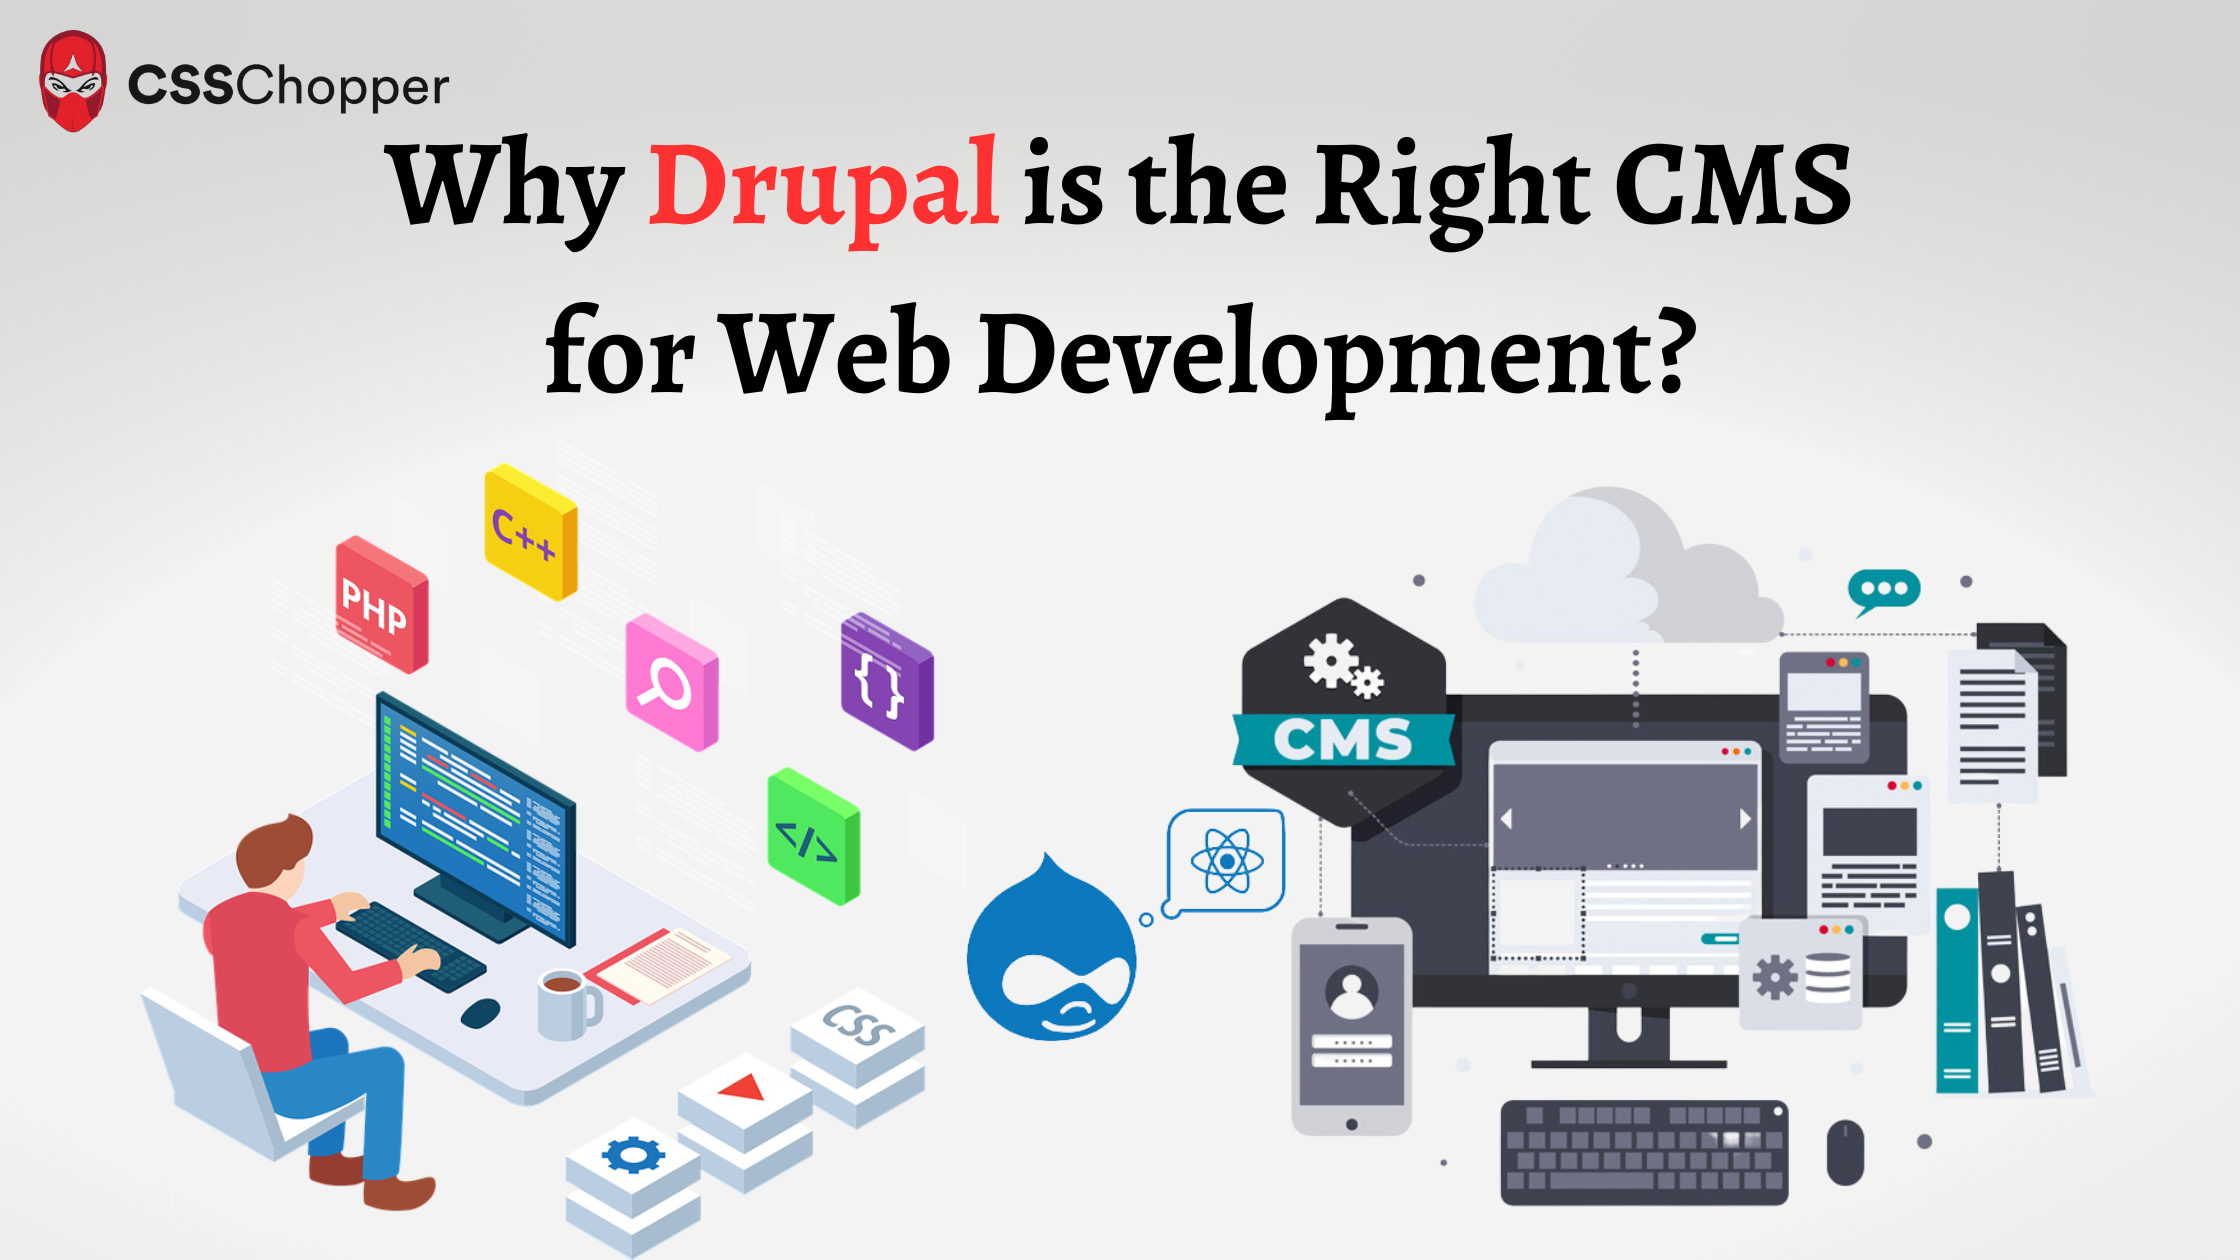 Why Drupal is the Right CMS for Web Development